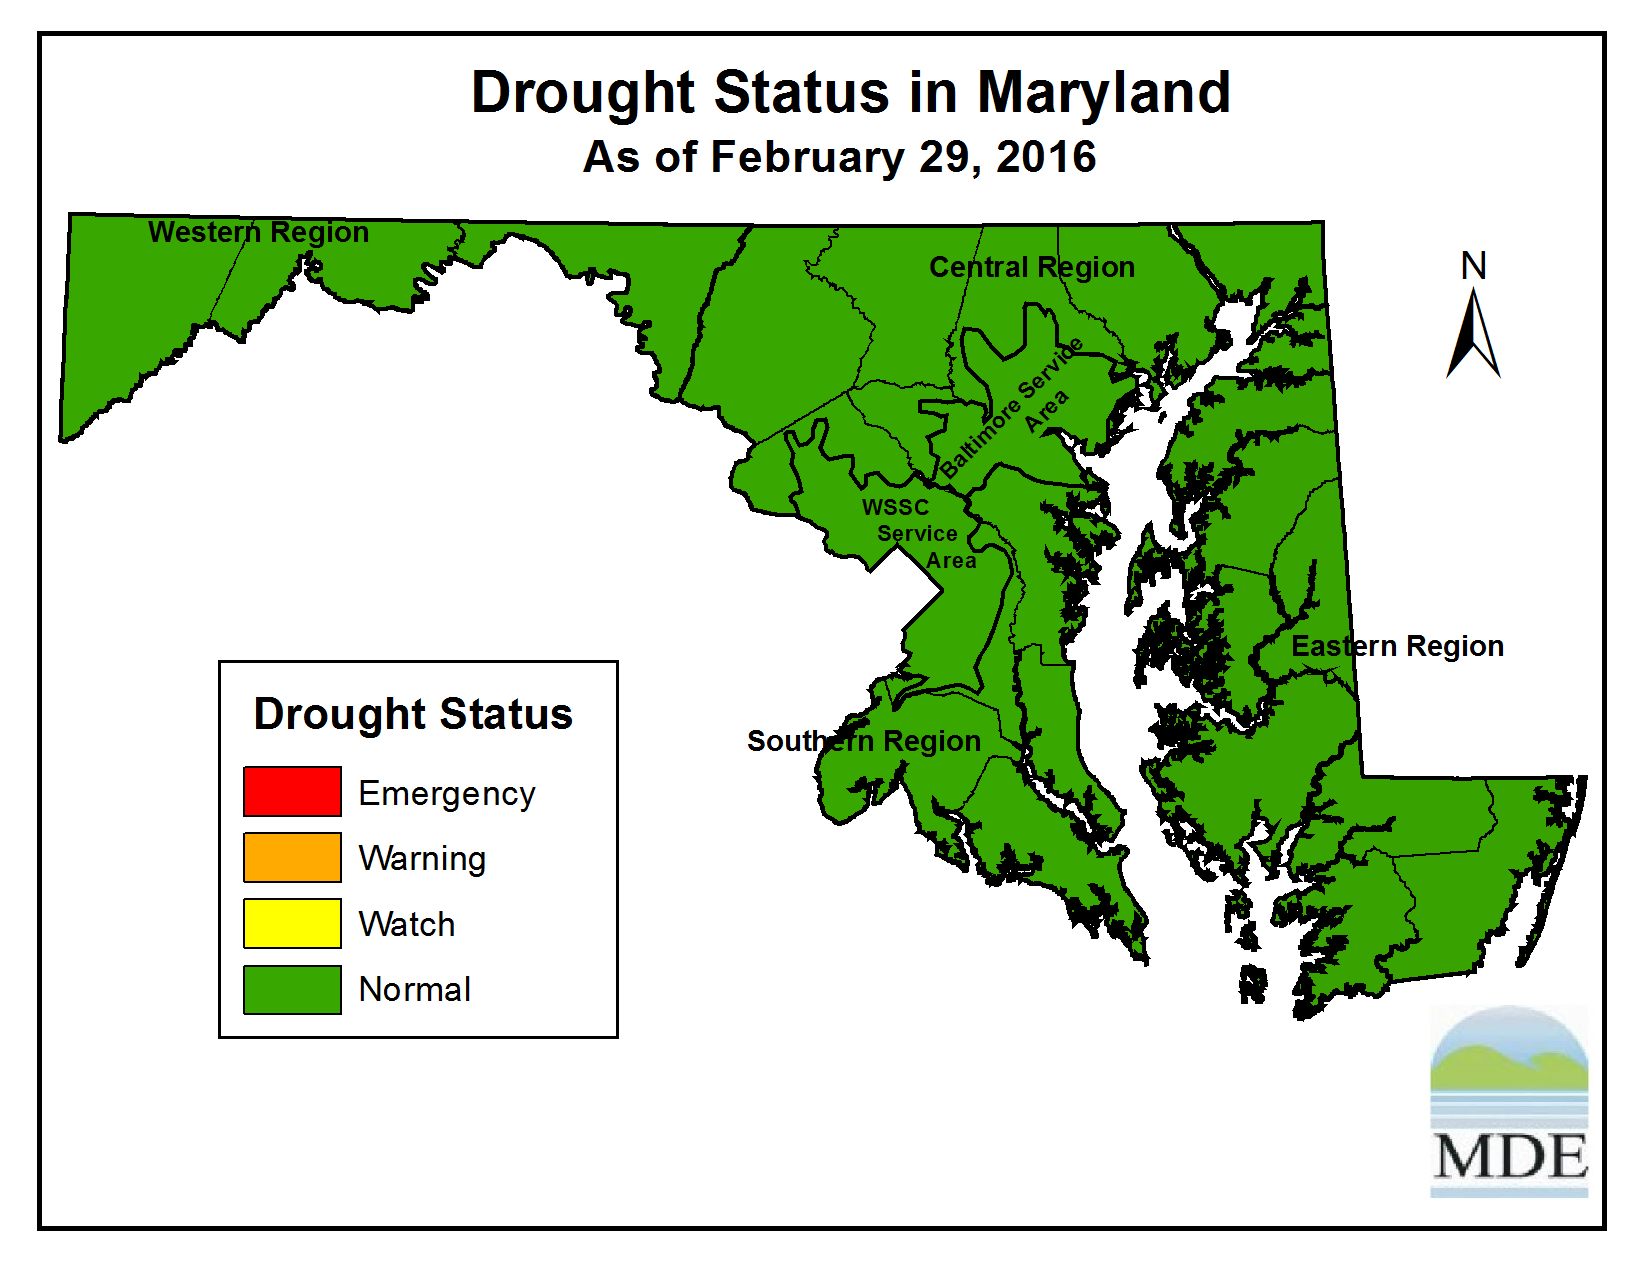 Drought Status as of February 29, 2016